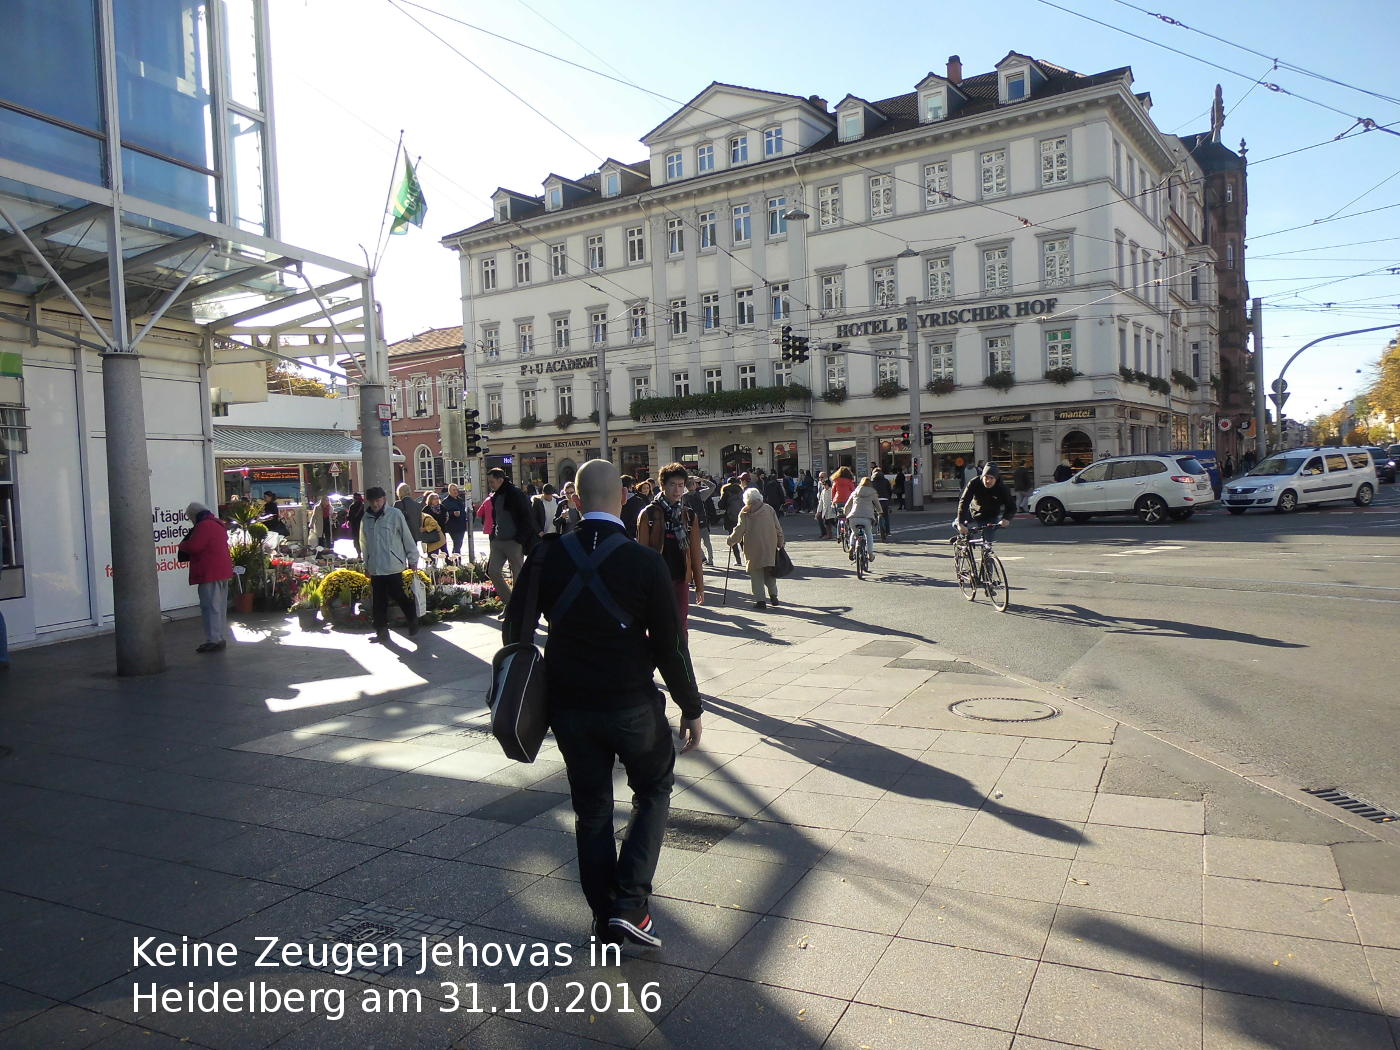 No Jehovah's Witnesses in Heidelberg on 10/31/2016